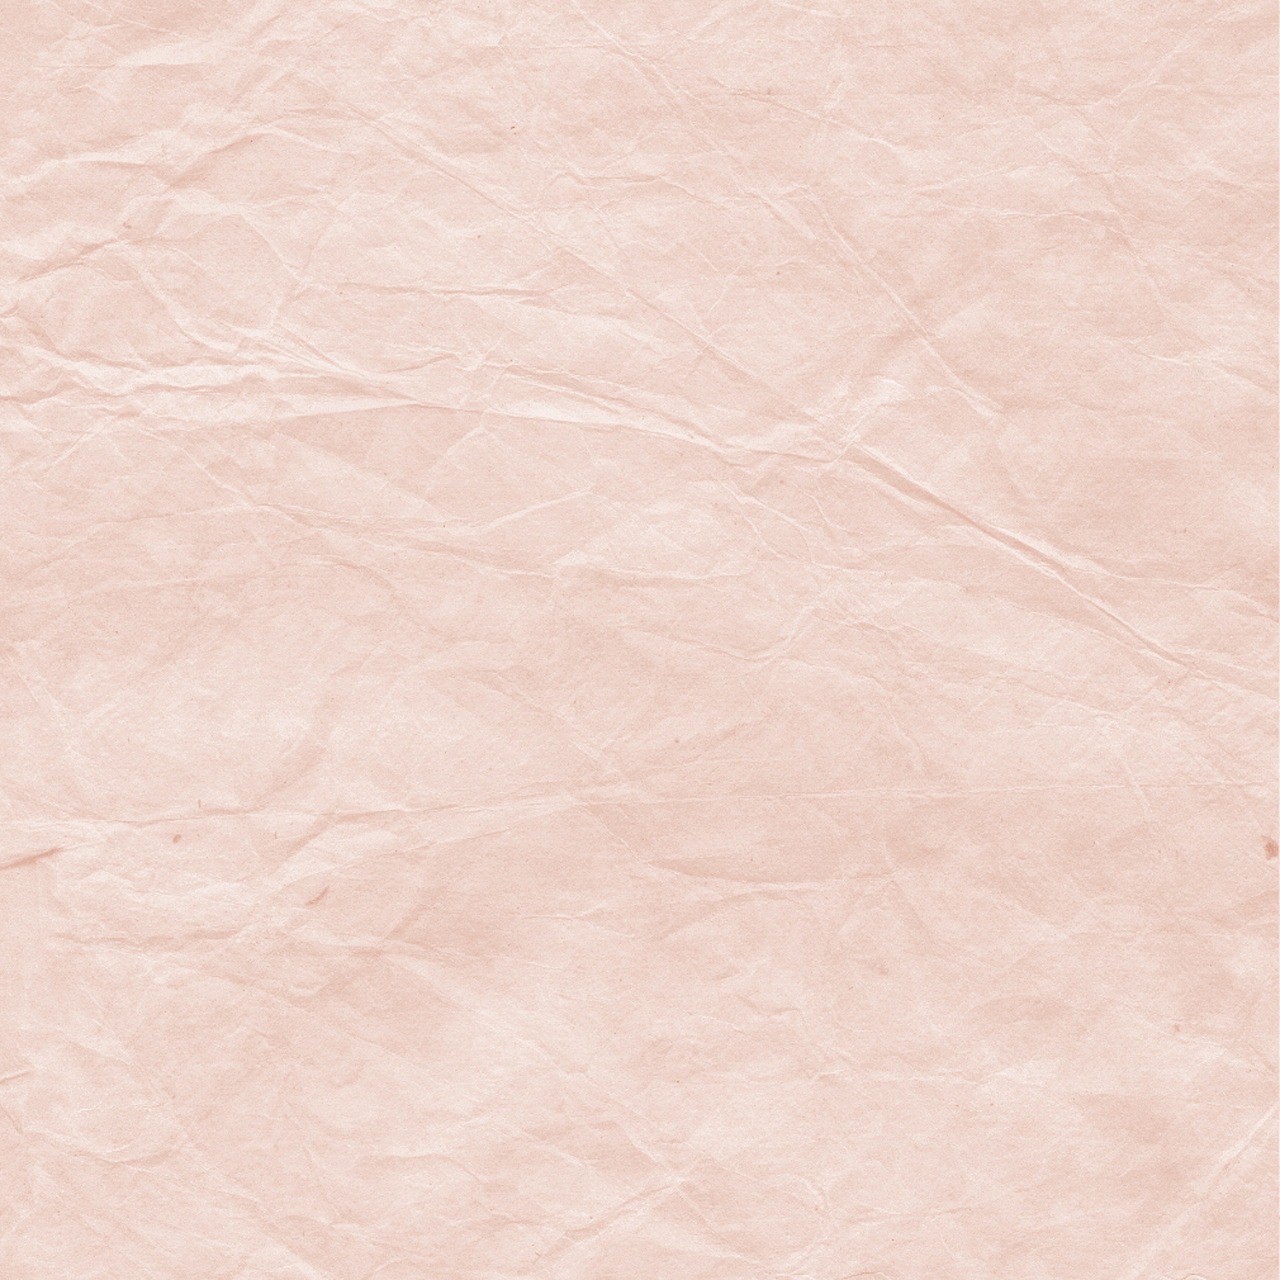 paper texture background free photo